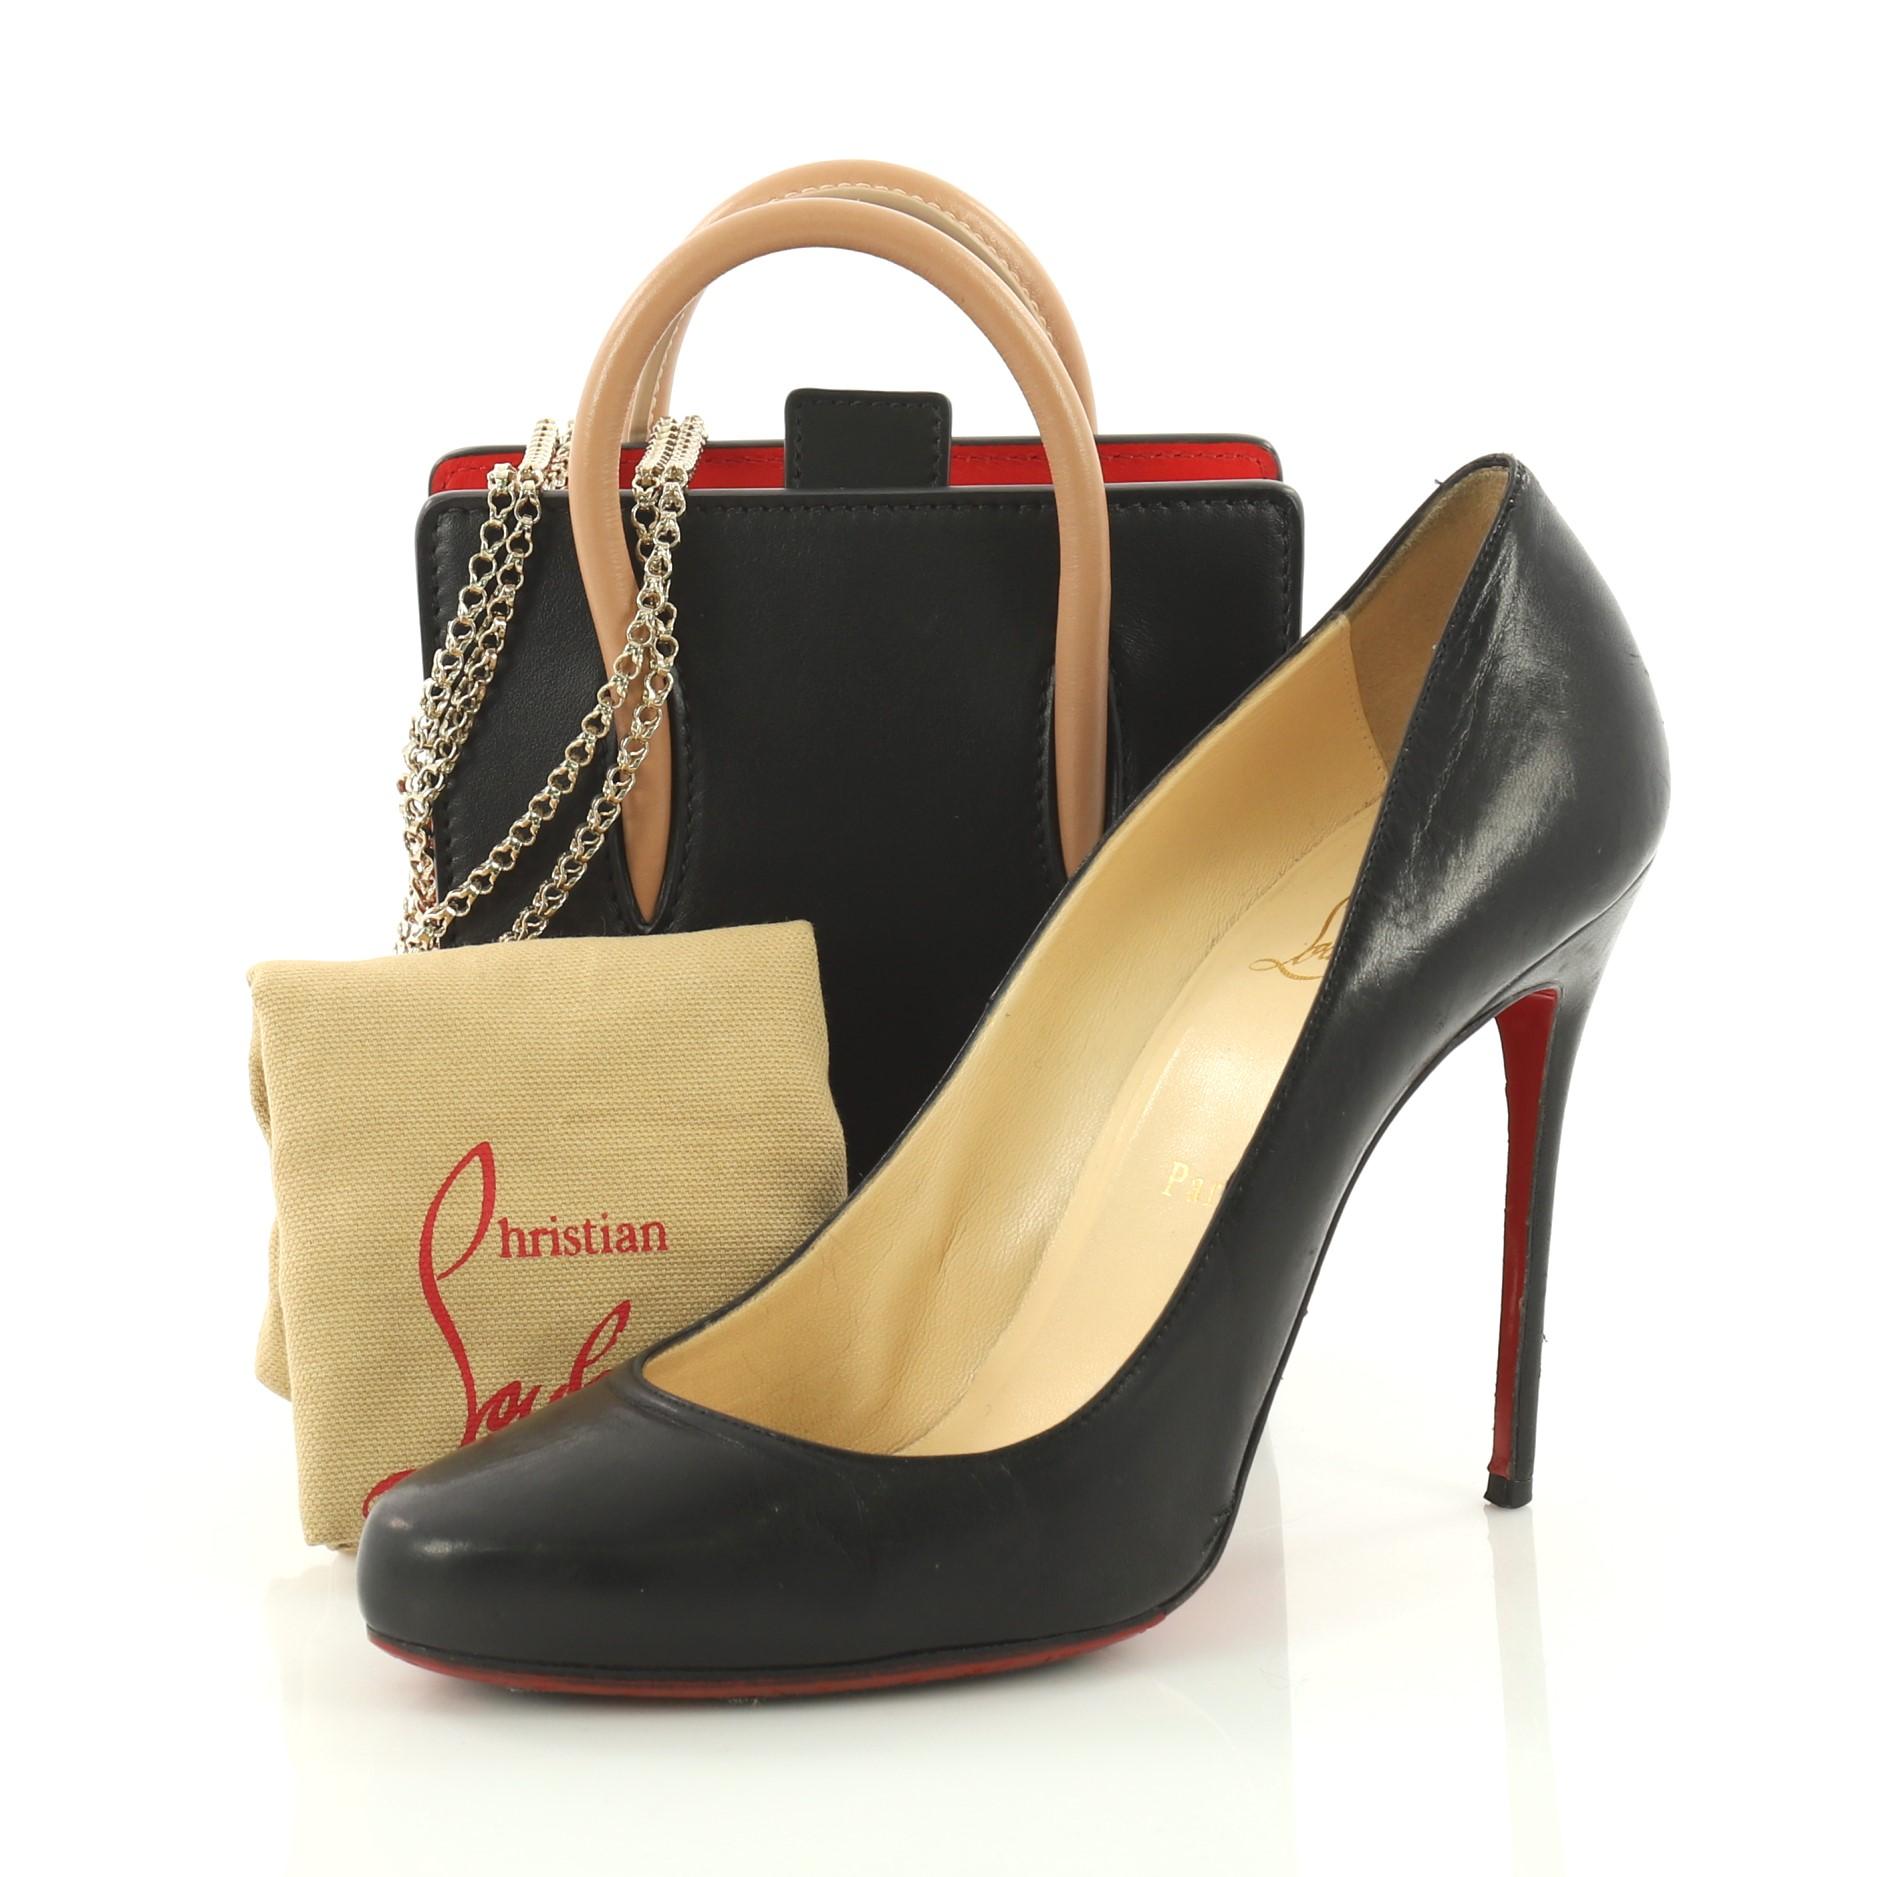 This authentic Christian Louboutin Paloma Tote Leather Nano is a unique piece made for avant-garde fashionistas. Crafted in black leather, this stand-out daring bag features spiked leopard print on the sides, tall dual-rolled leather handles,